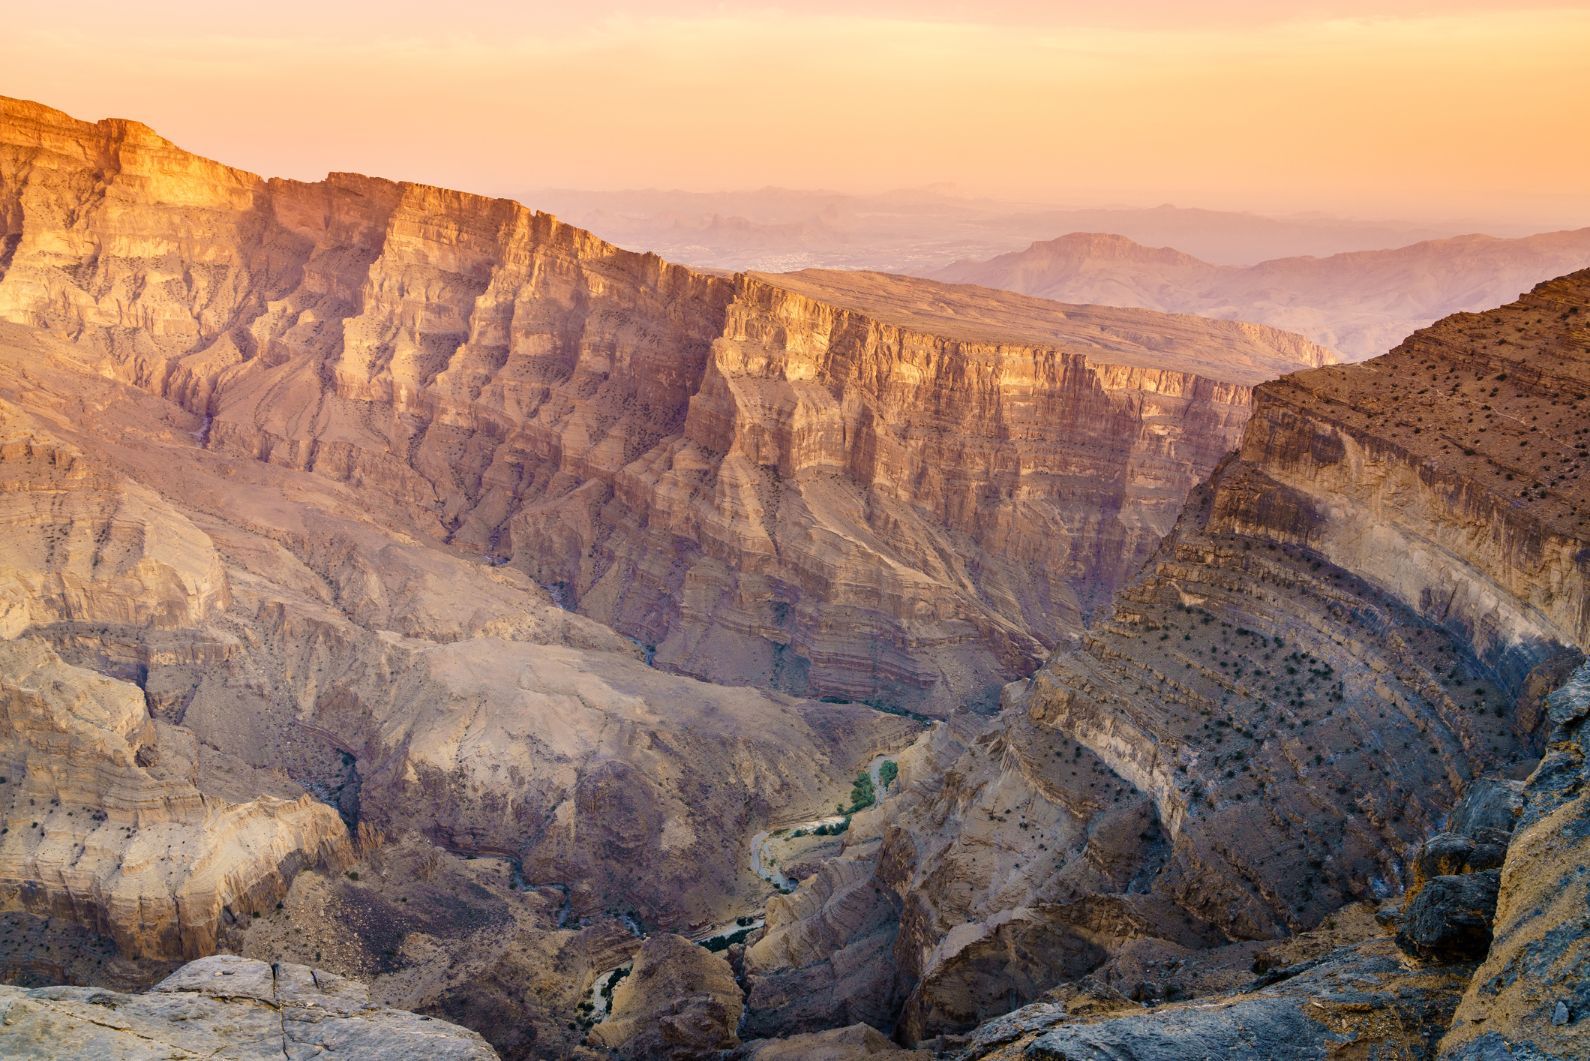 Wadi Ghul, also known as the Grand Canyon of Arabia, in Jewel Shams in Oman. 